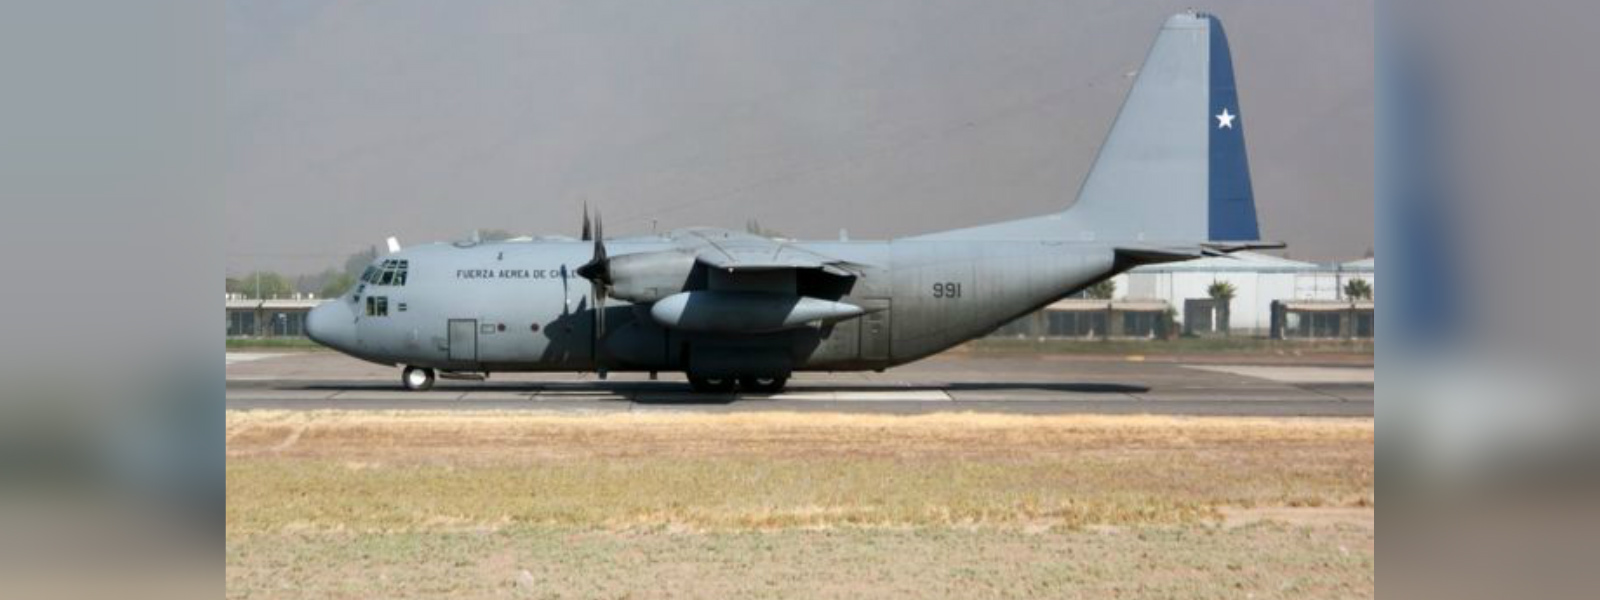 Chilean military plane en route to Antarctica disappears with 38 on board